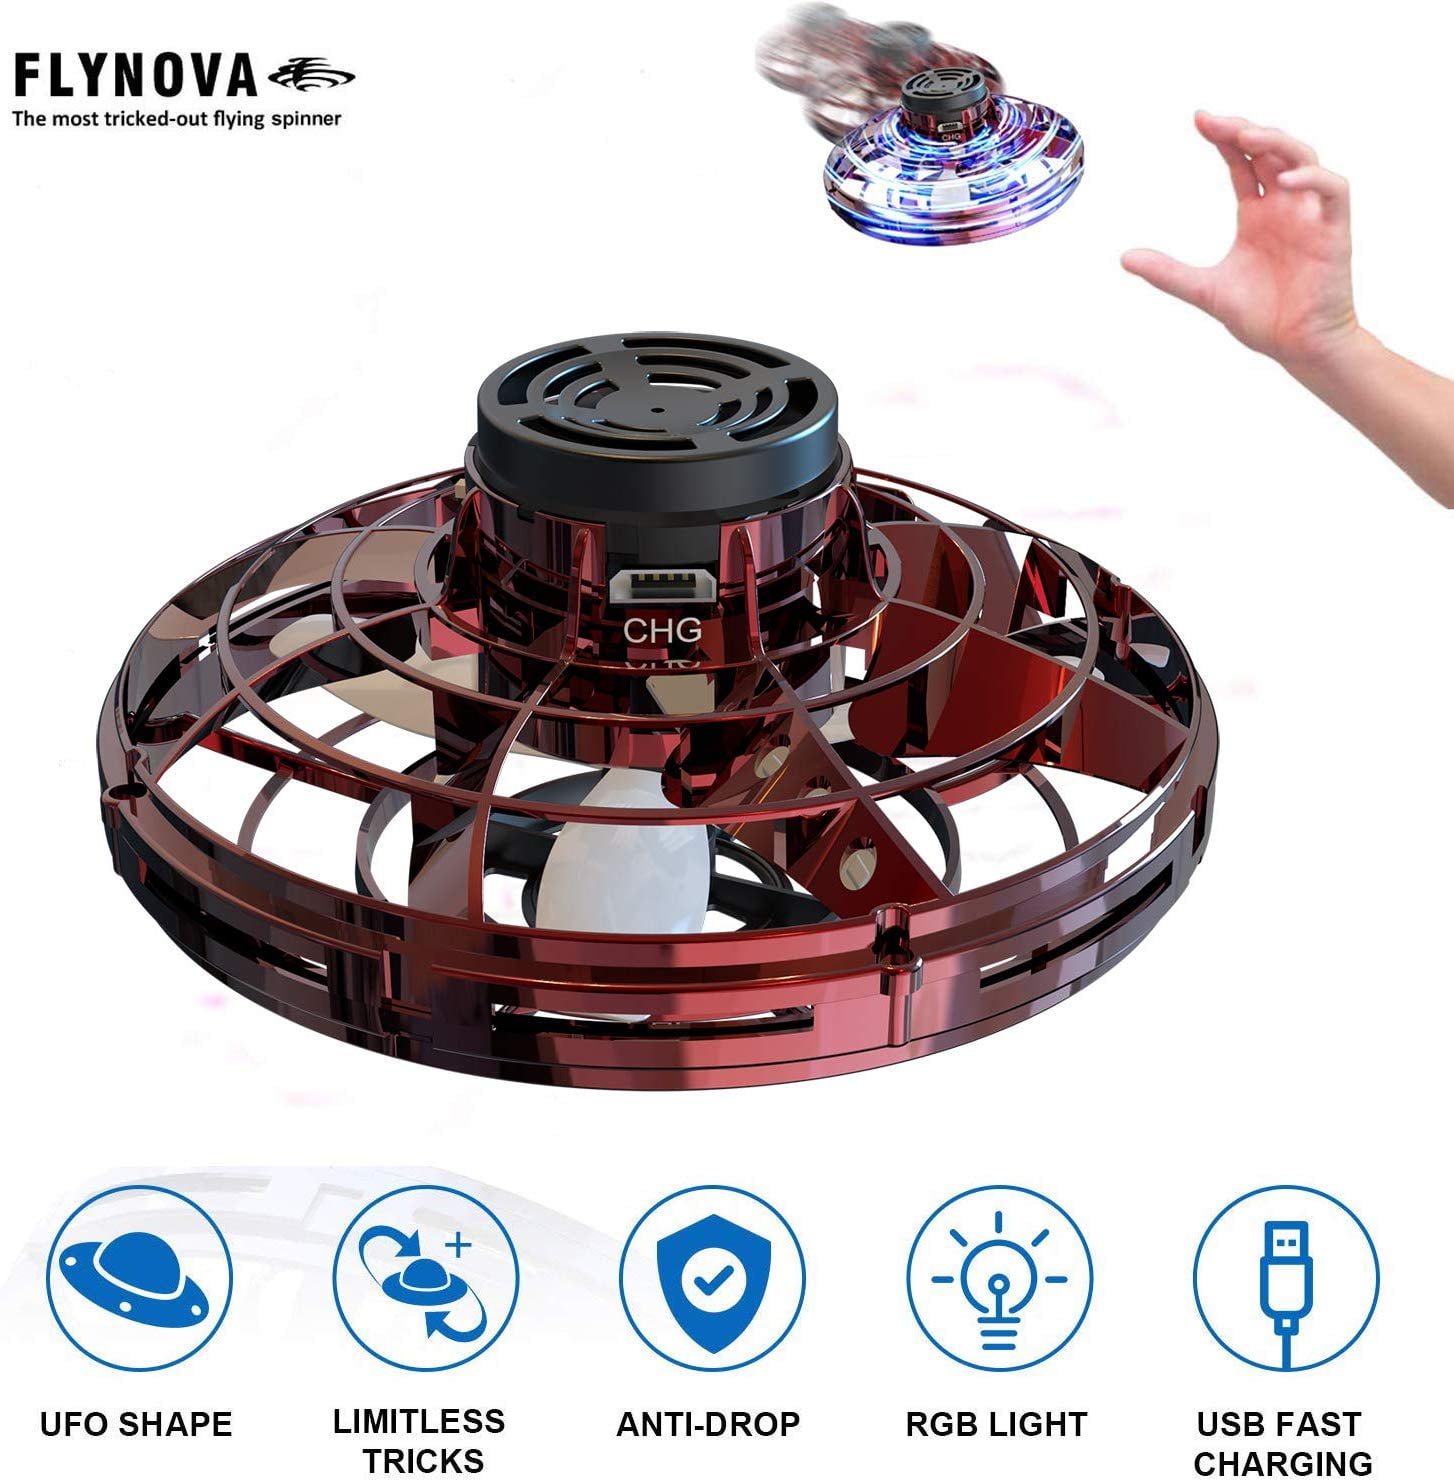 Blue Mini Infrared Sensor Flying Saucer UFO Hand Induced Hovering and Floating Flight Hand Movements Toy UFO Magic Trick Toys with LED Lights Geekercity Cute UFO Flying Disc 